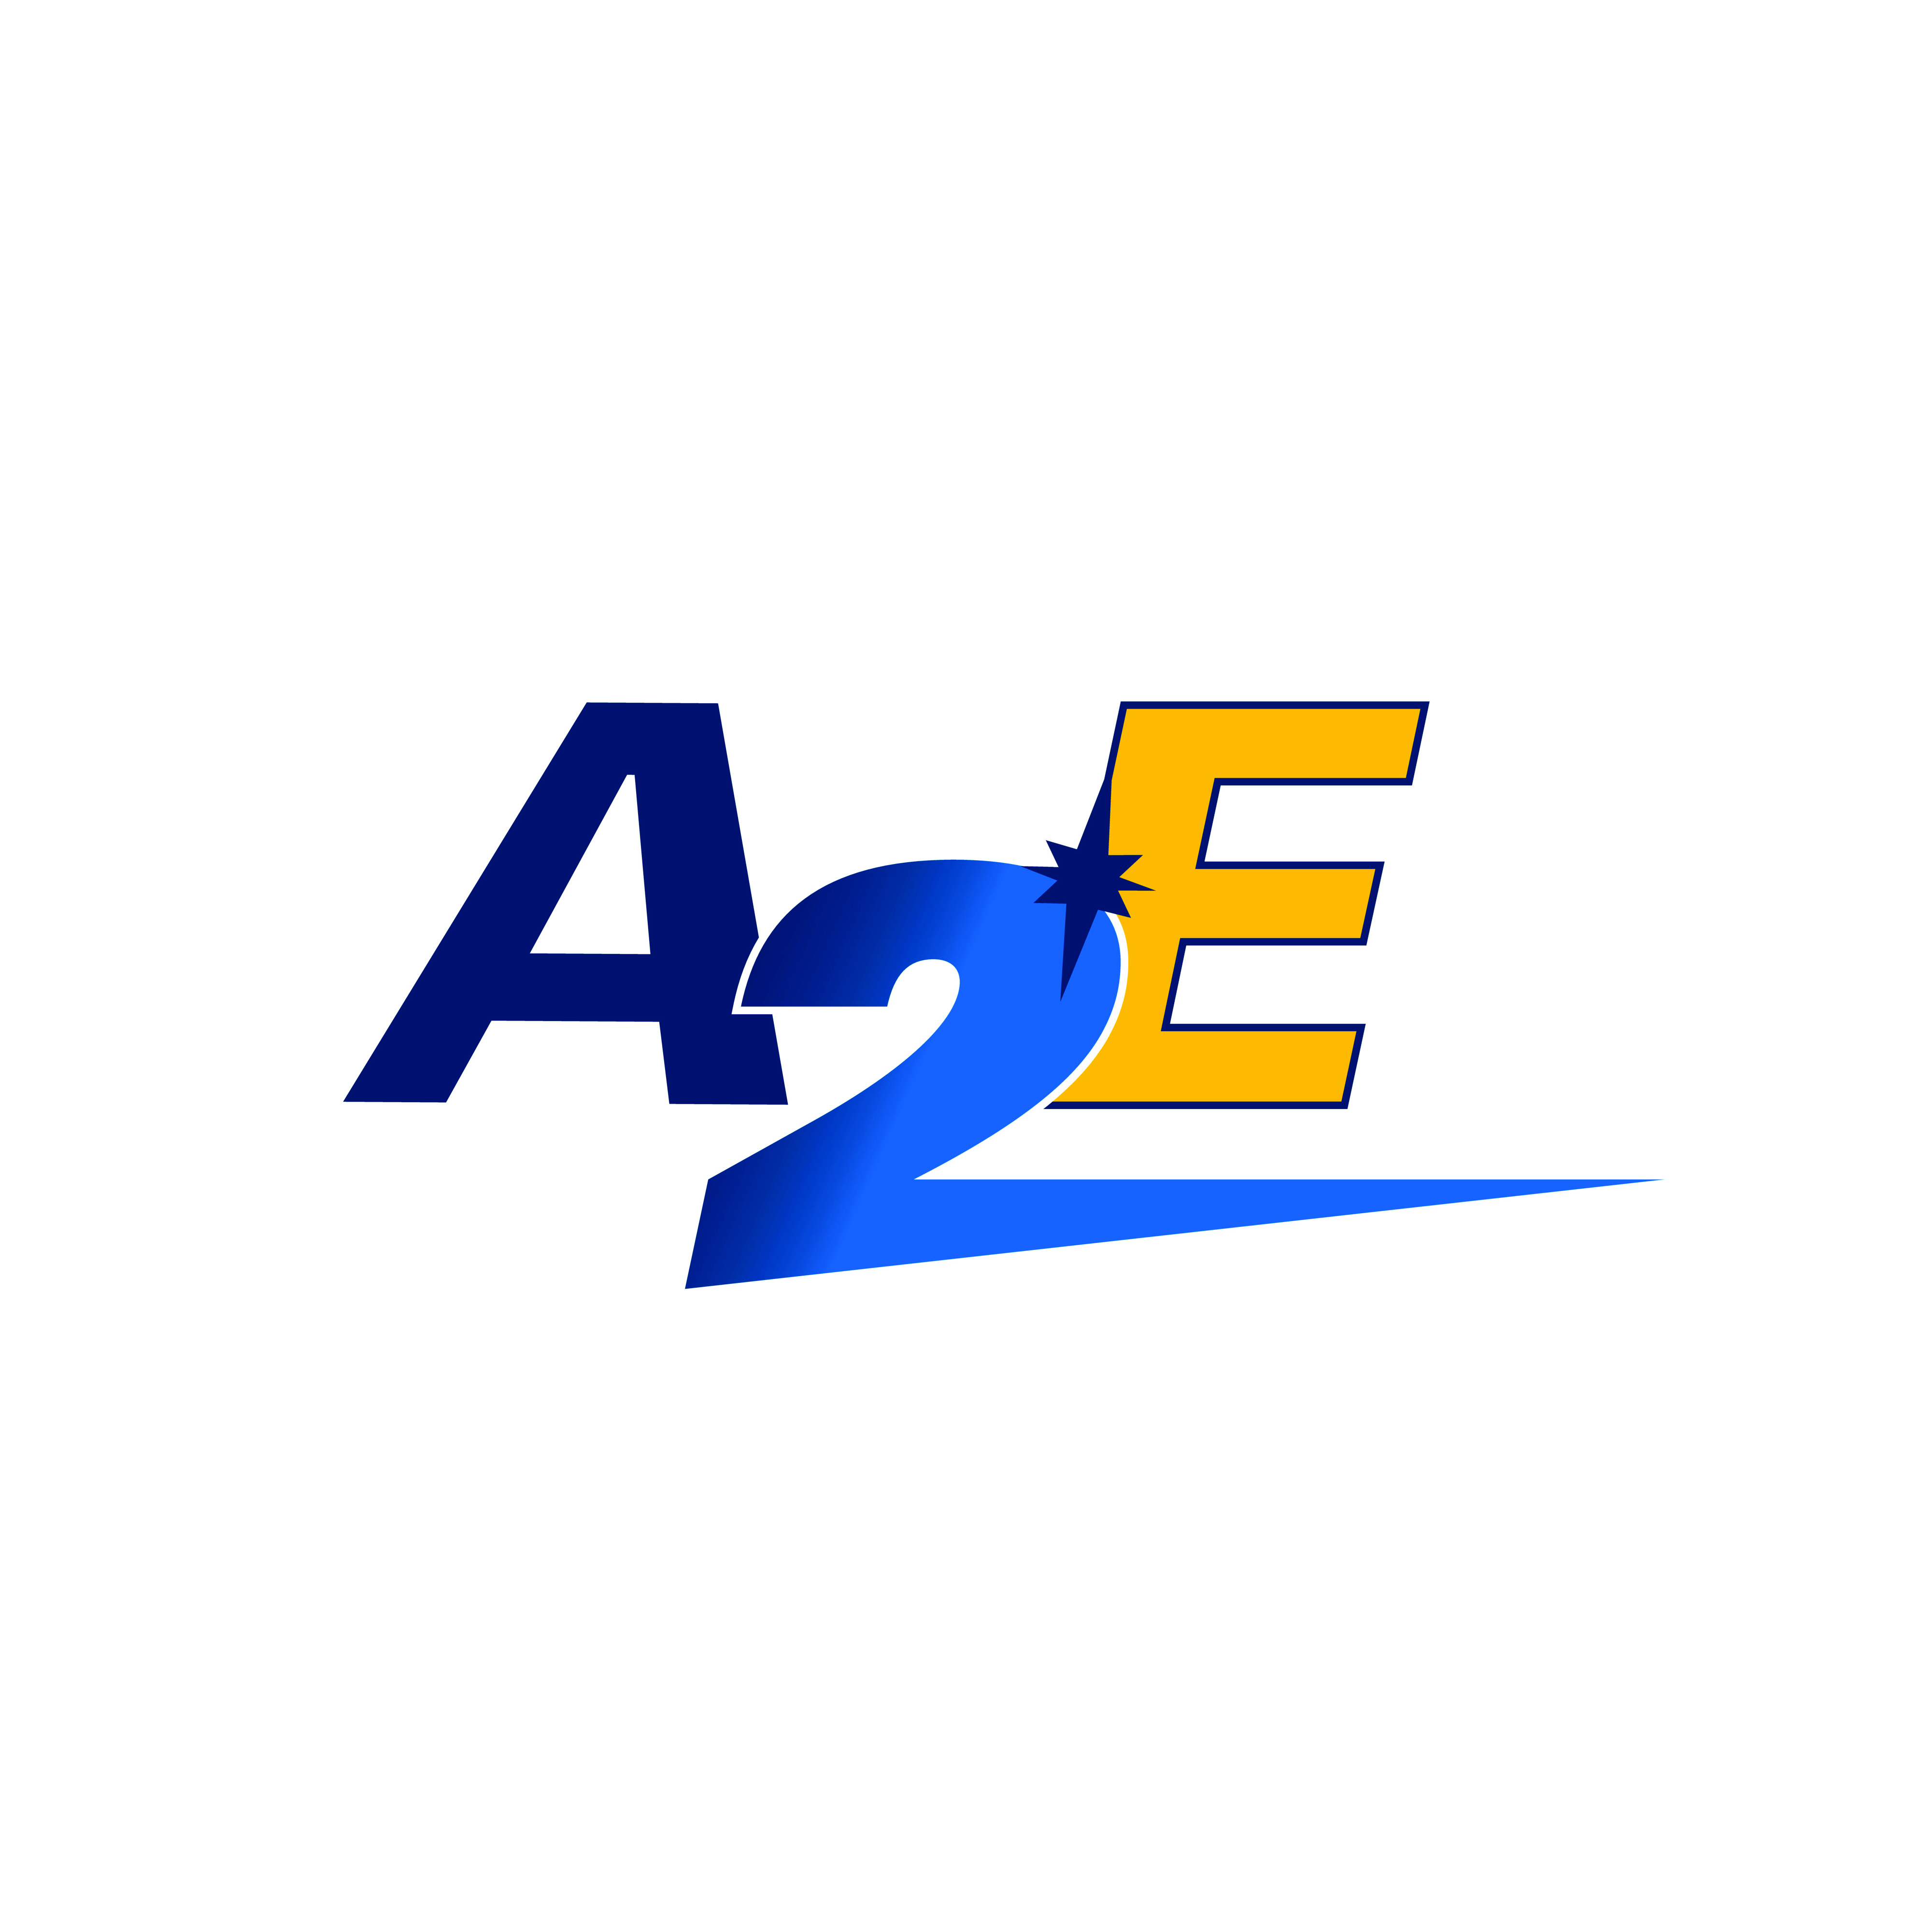 Access2Excellence logo reading "A2E" in blue and yellow block letters.